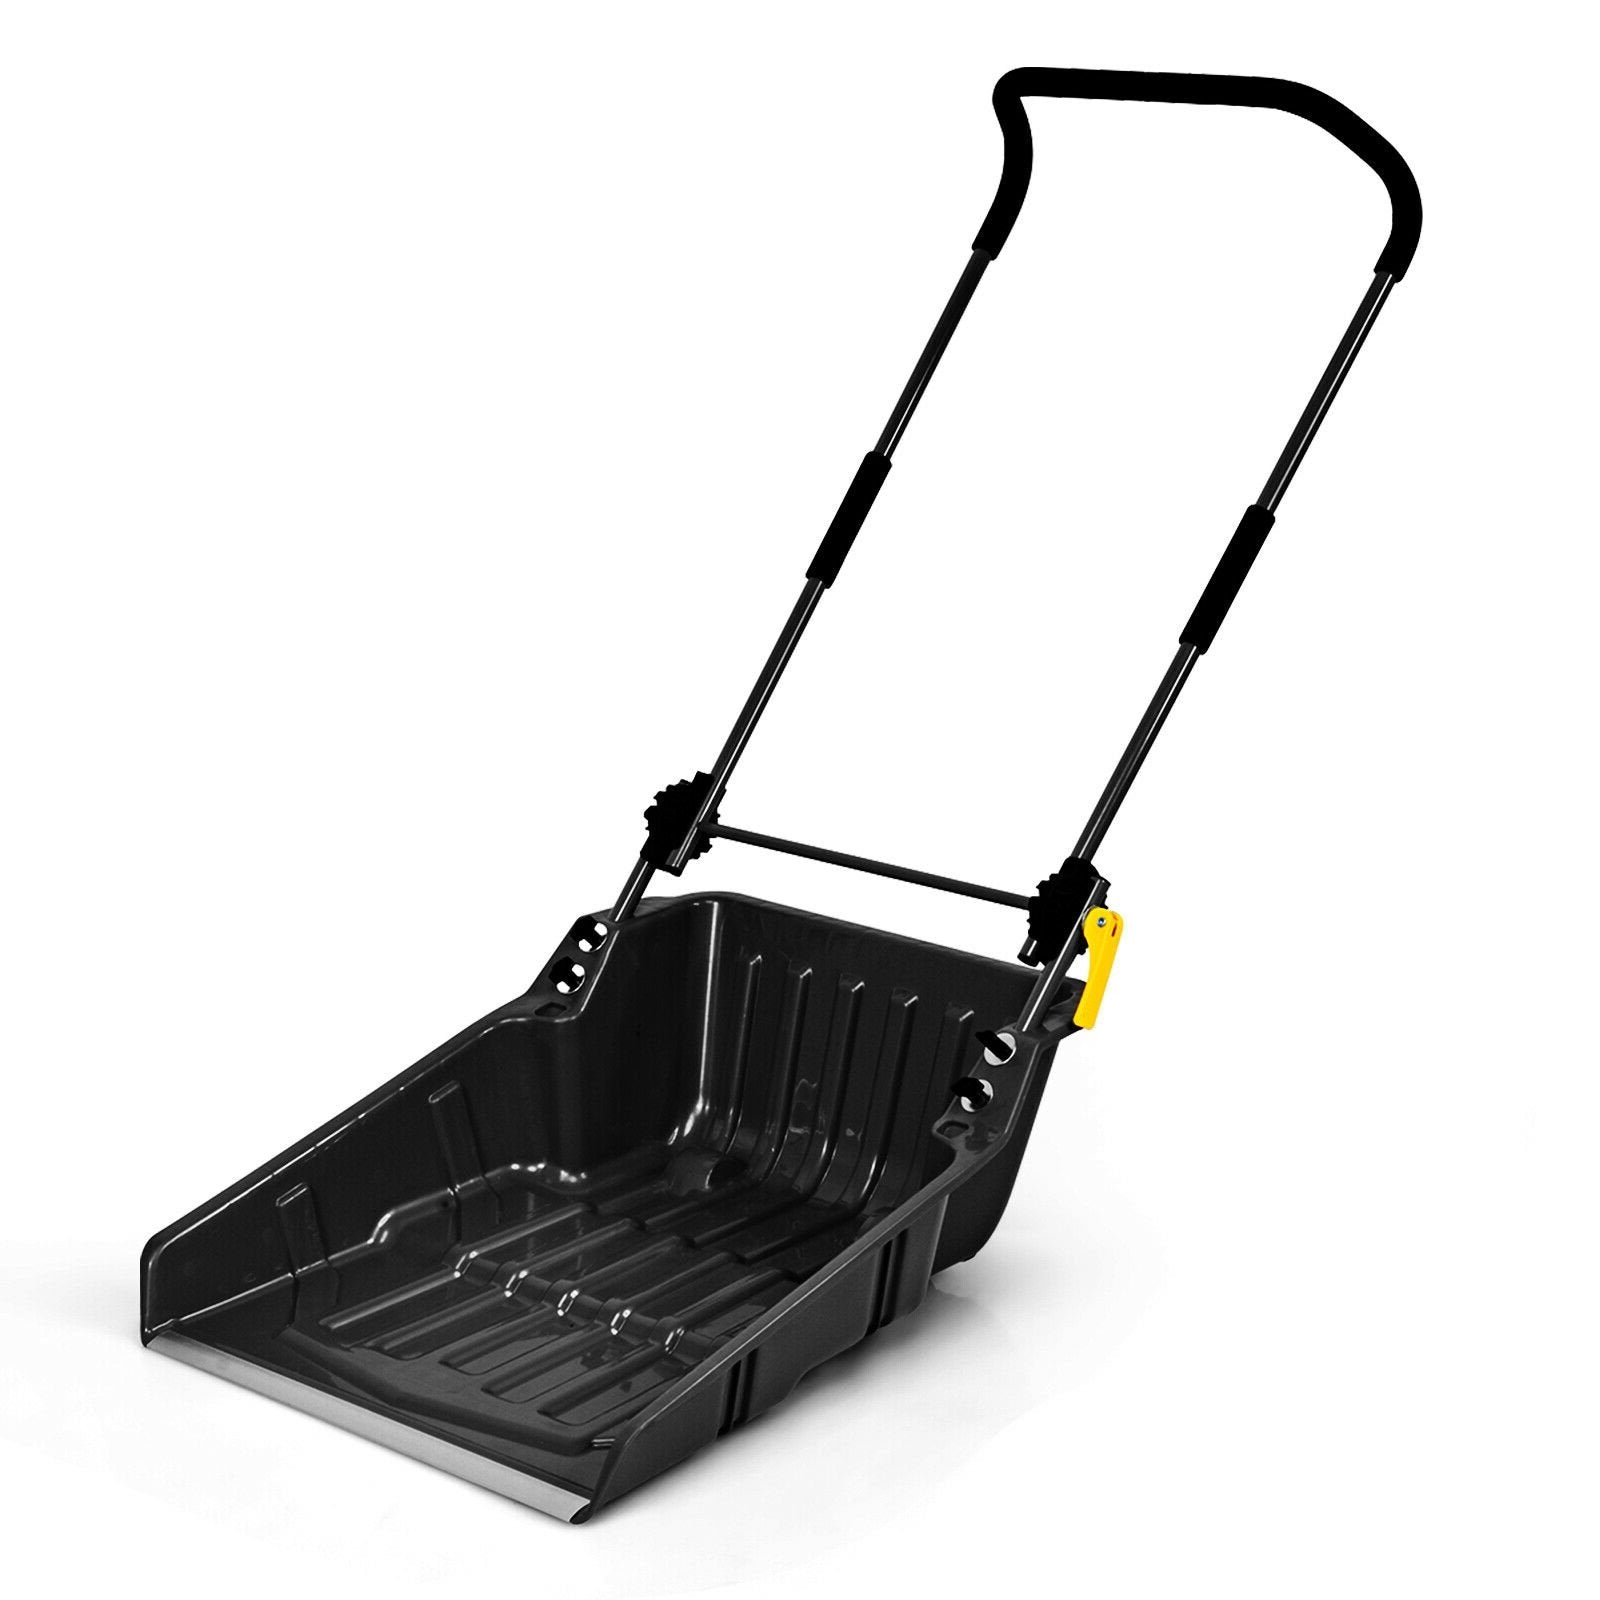 Folding Snow Pusher Scoop Shovel with Wheels and Handle, Black - Gallery Canada